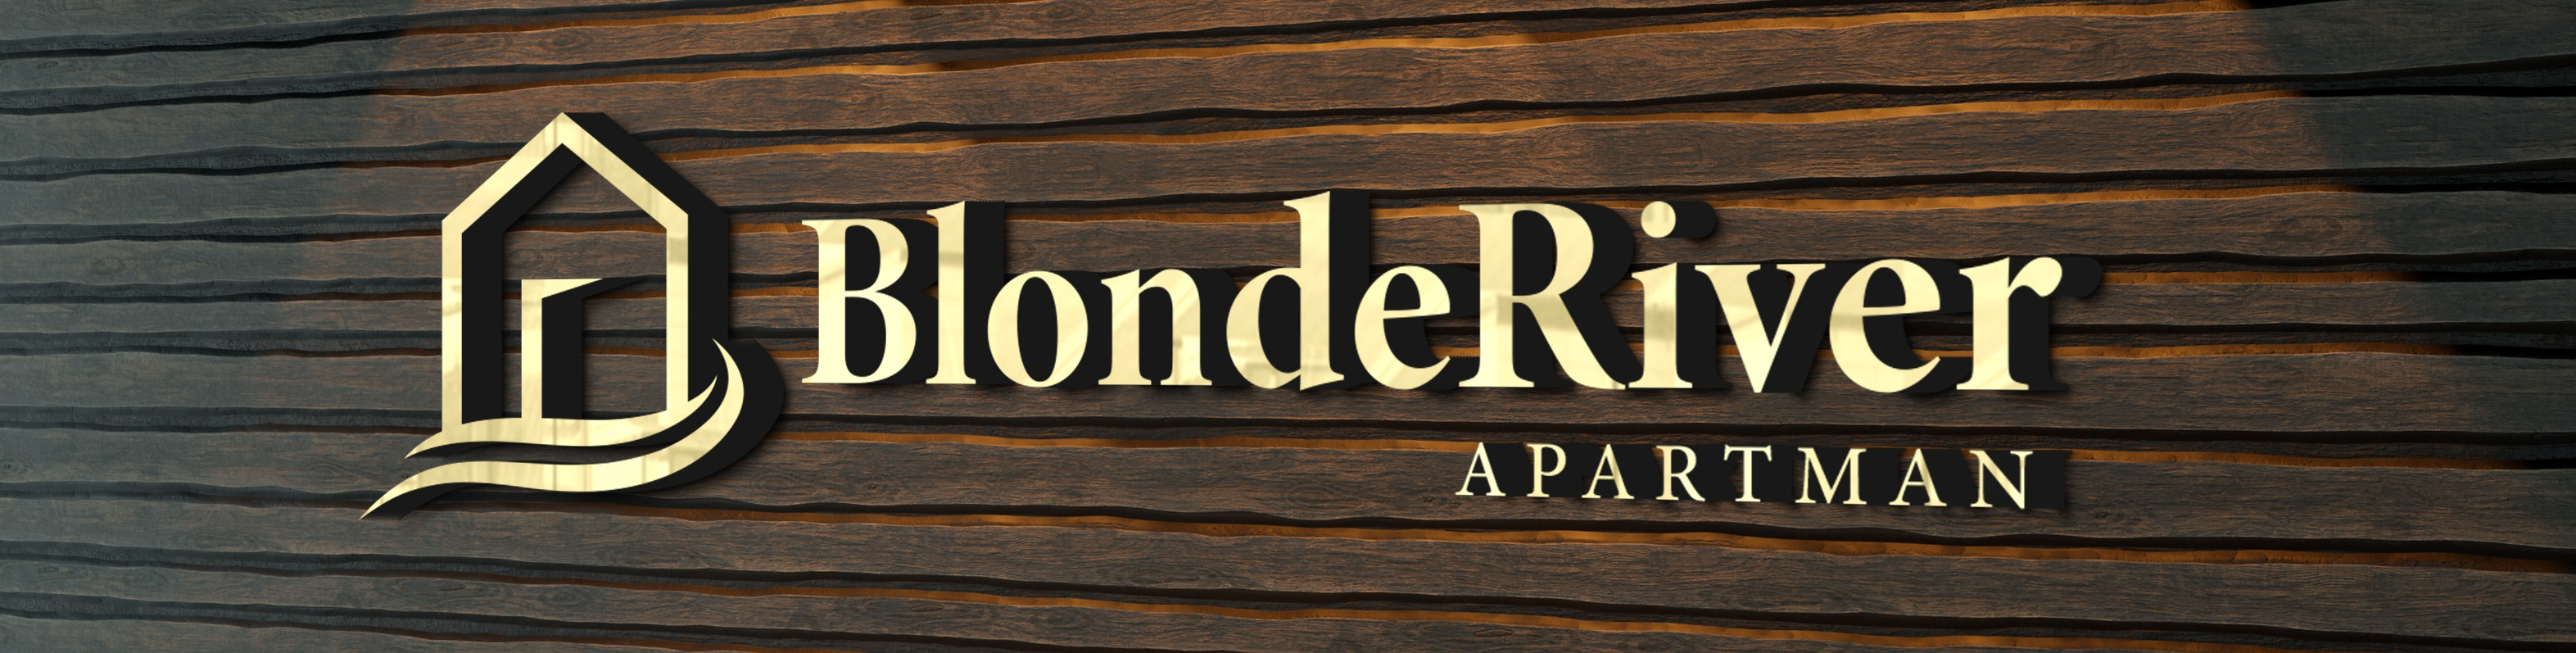 The logo and image of the Blonde River Apartment.